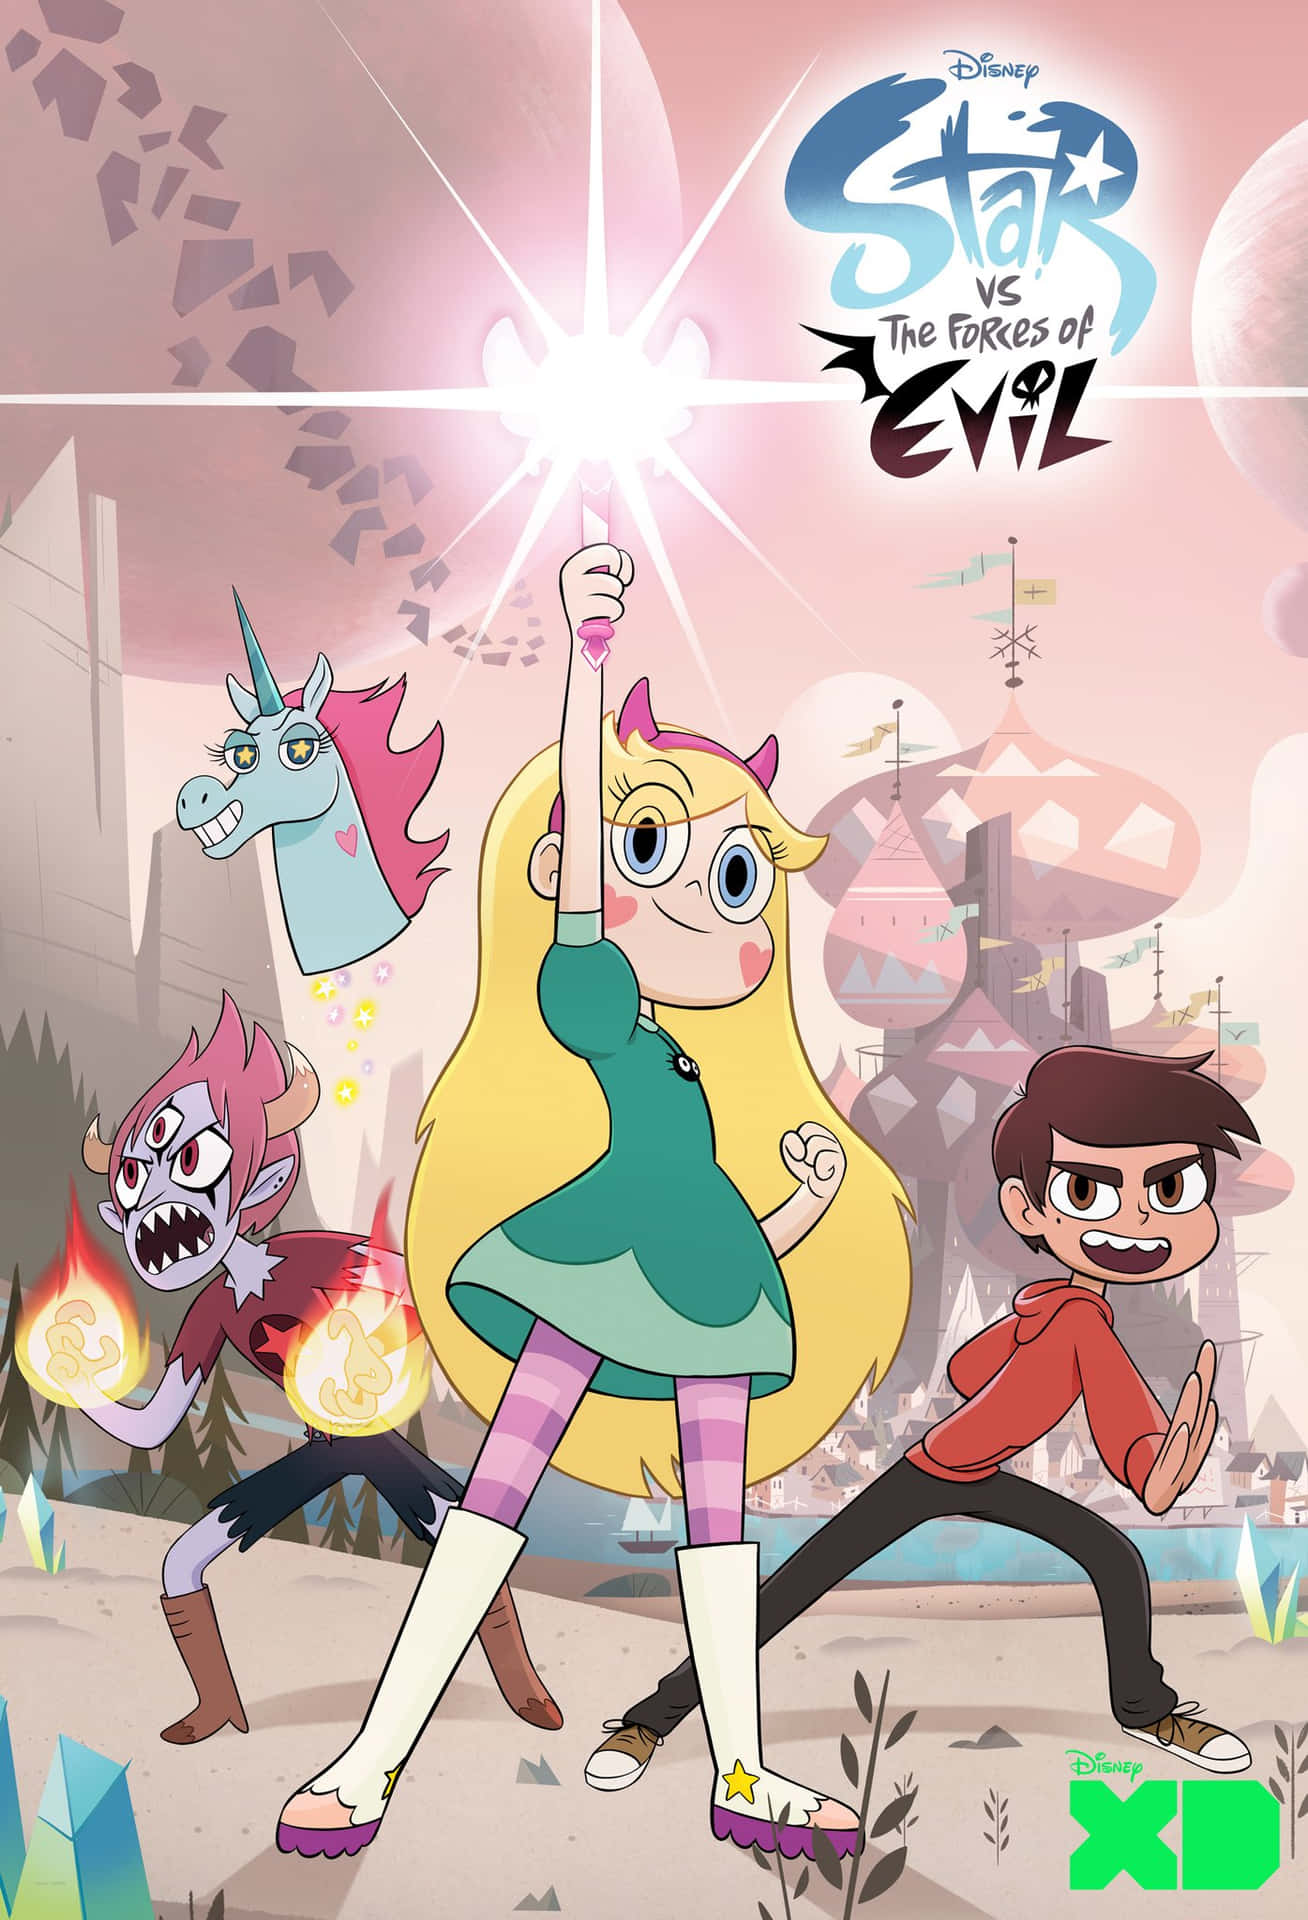 Wielding magical powers, Star Butterfly fights the forces of evil